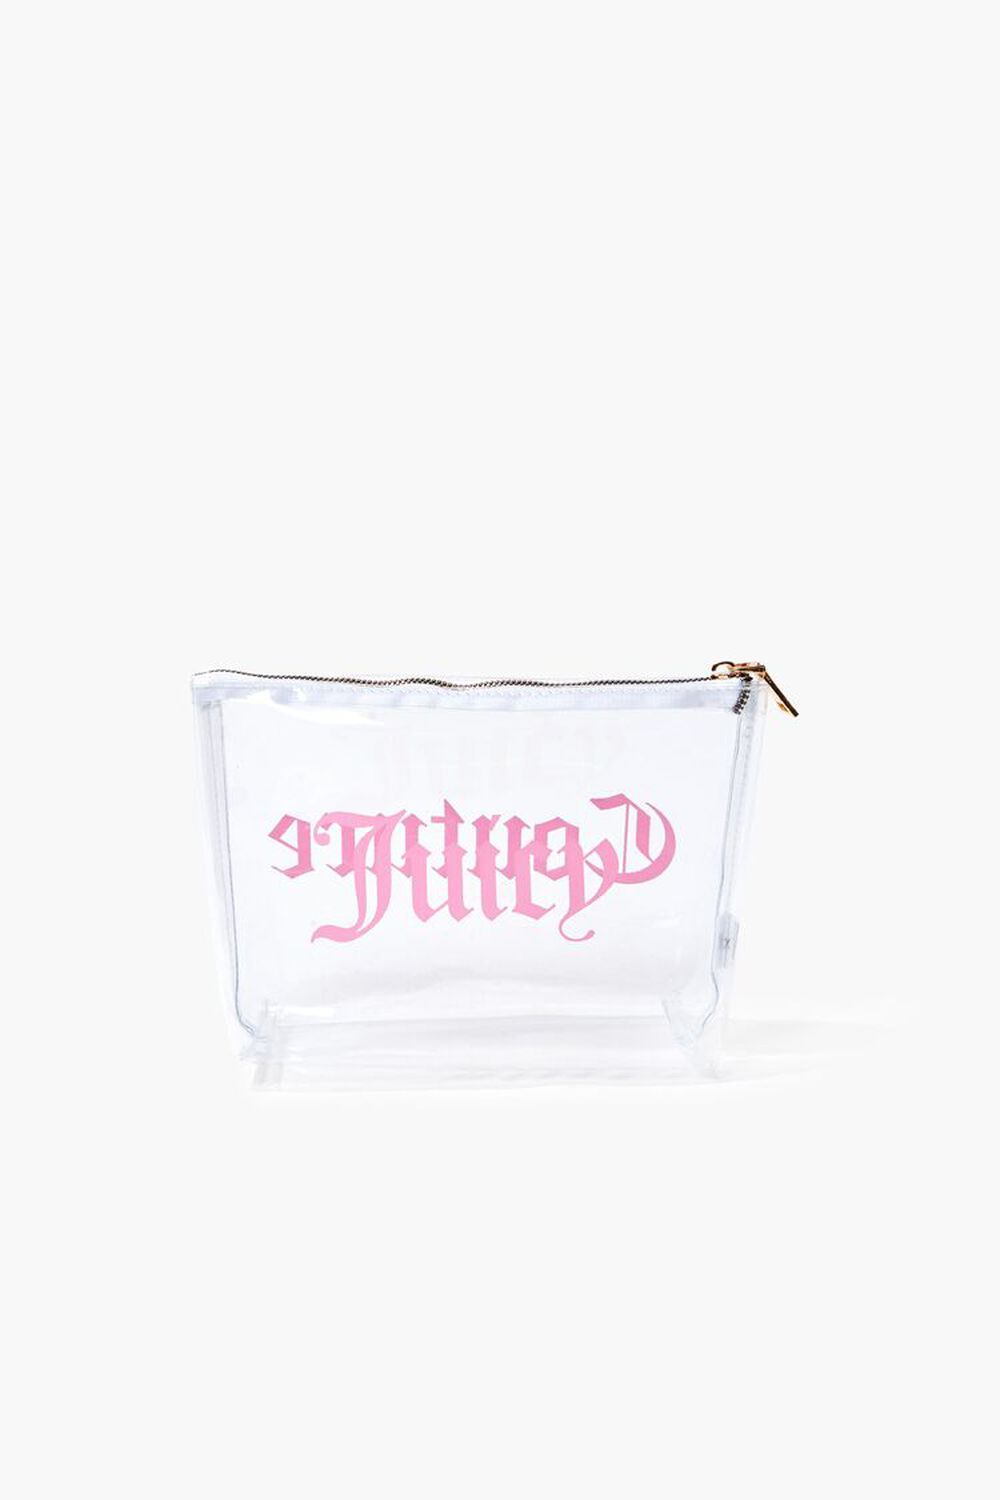 CLEAR Juicy Couture Text Clear Pouch, image 1